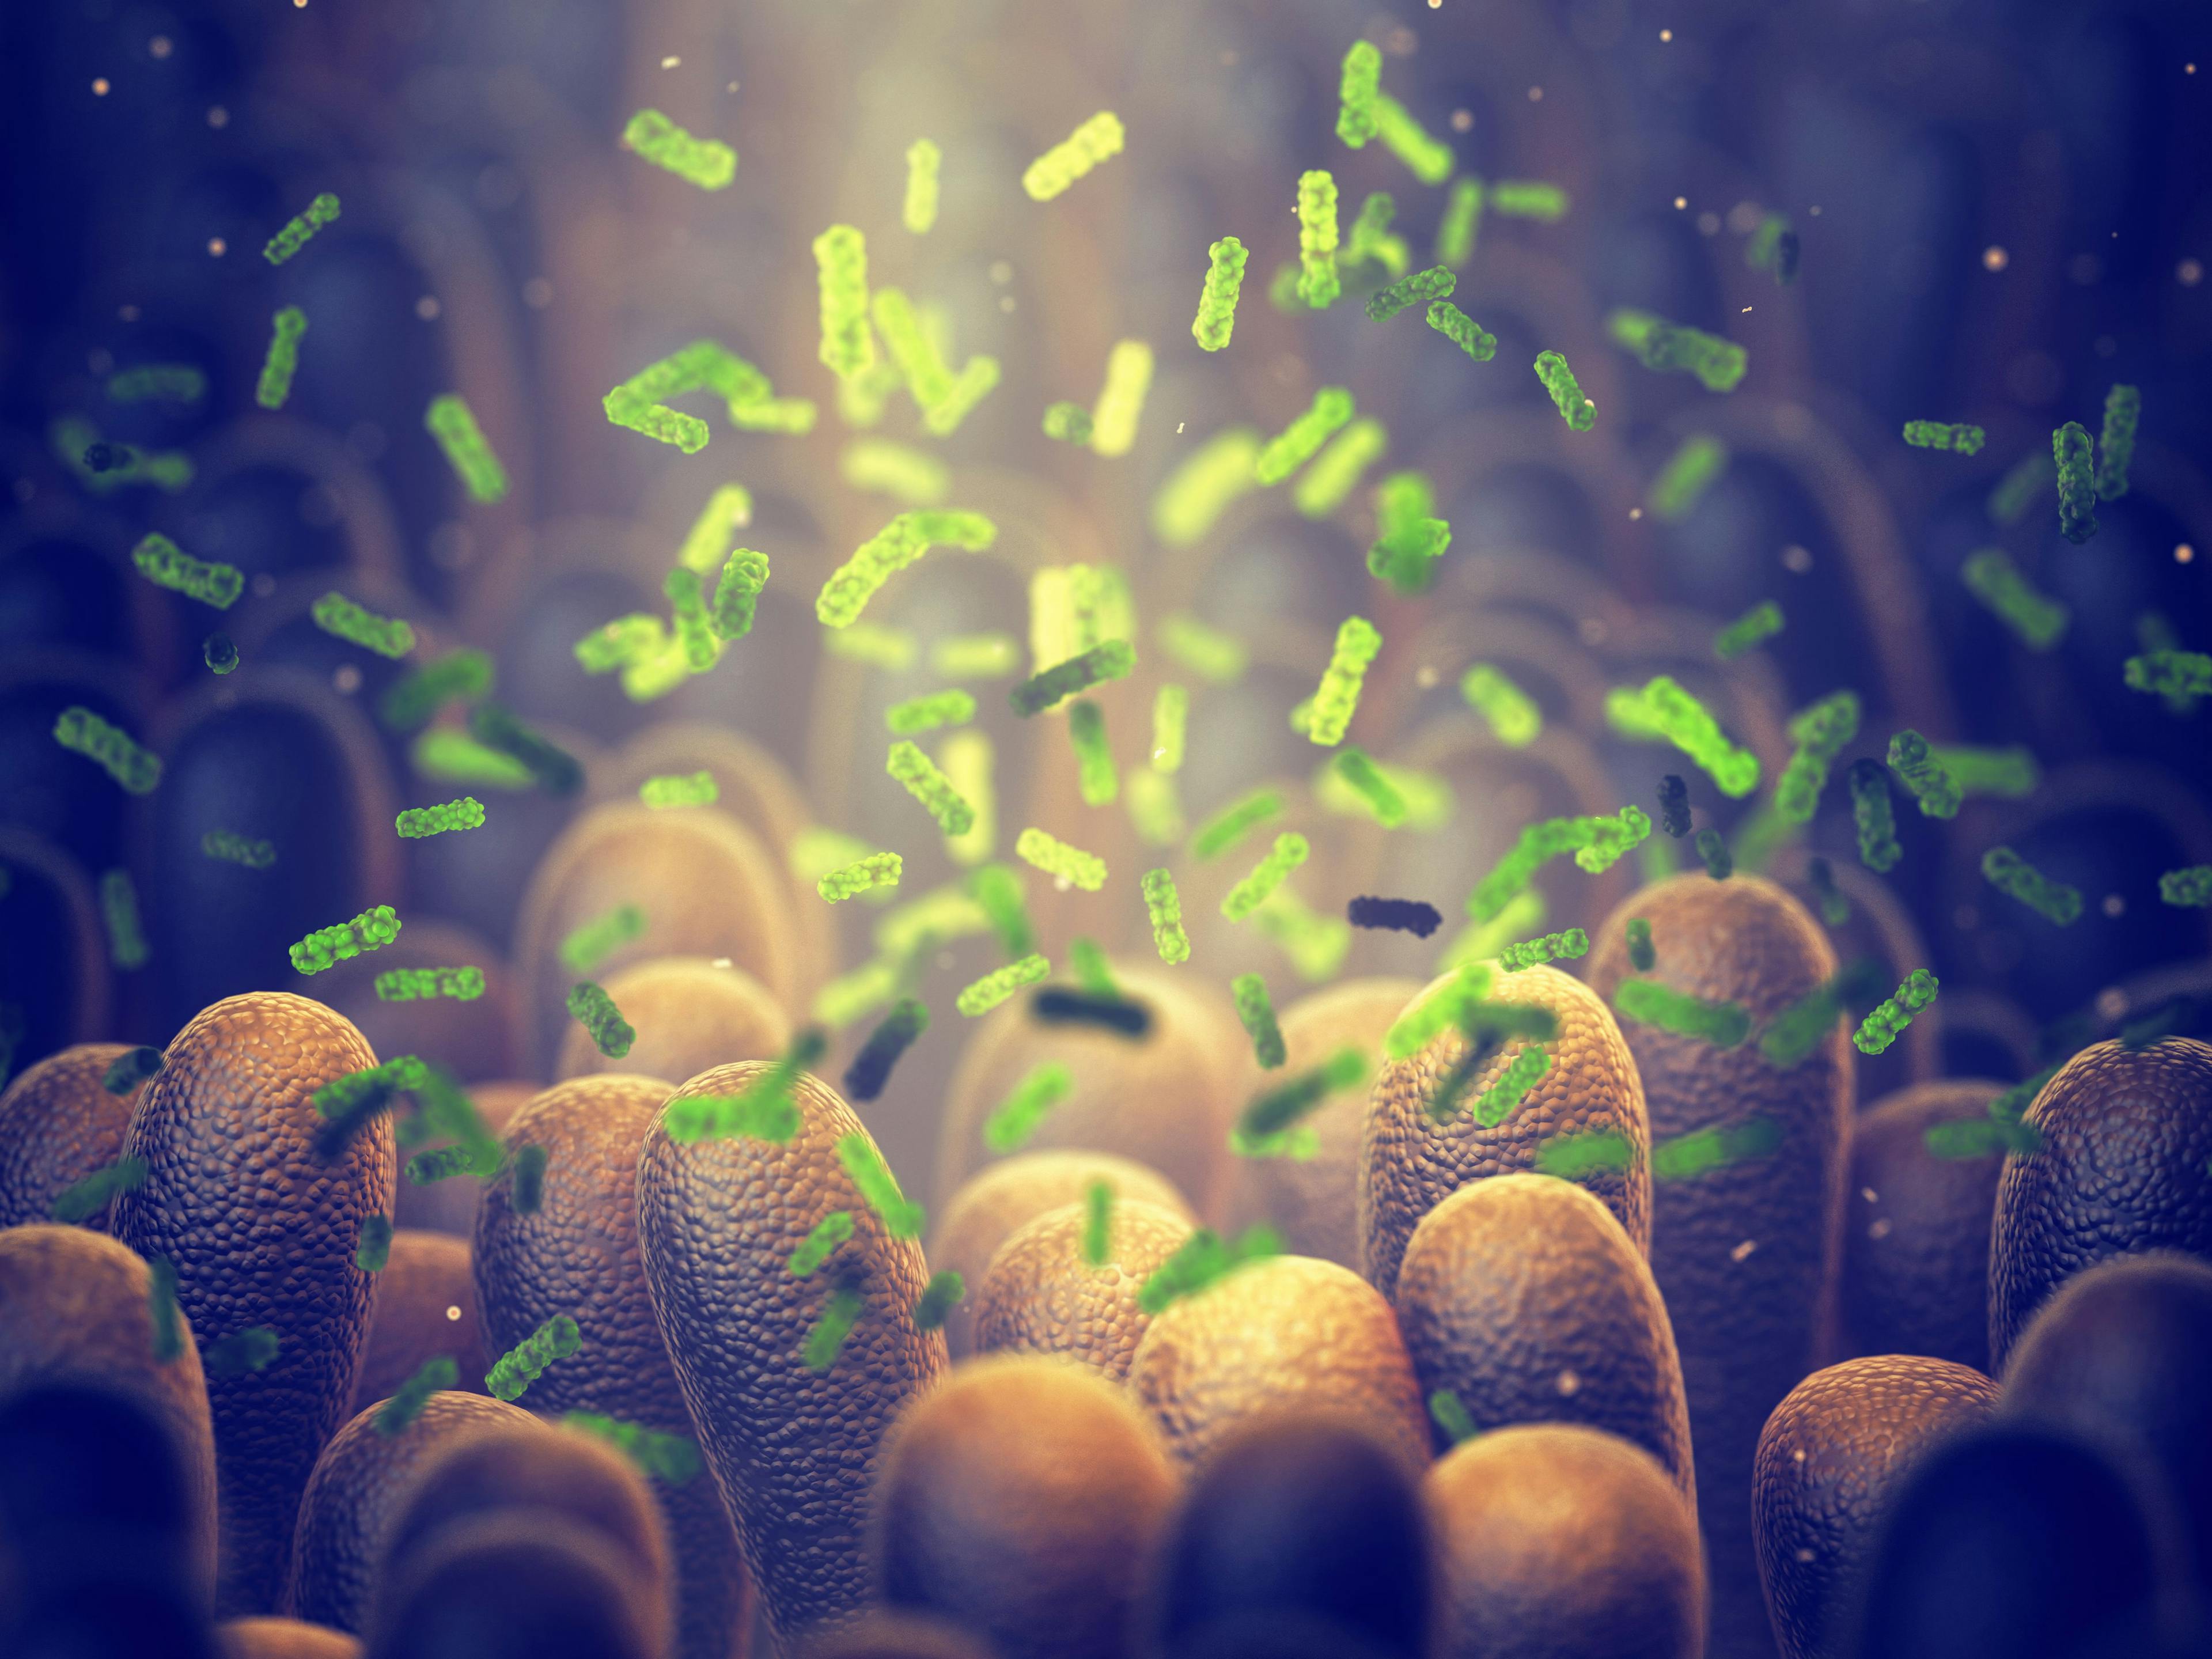 Novel Treatment Extends Time to Recurrence in Patients With C. Difficile